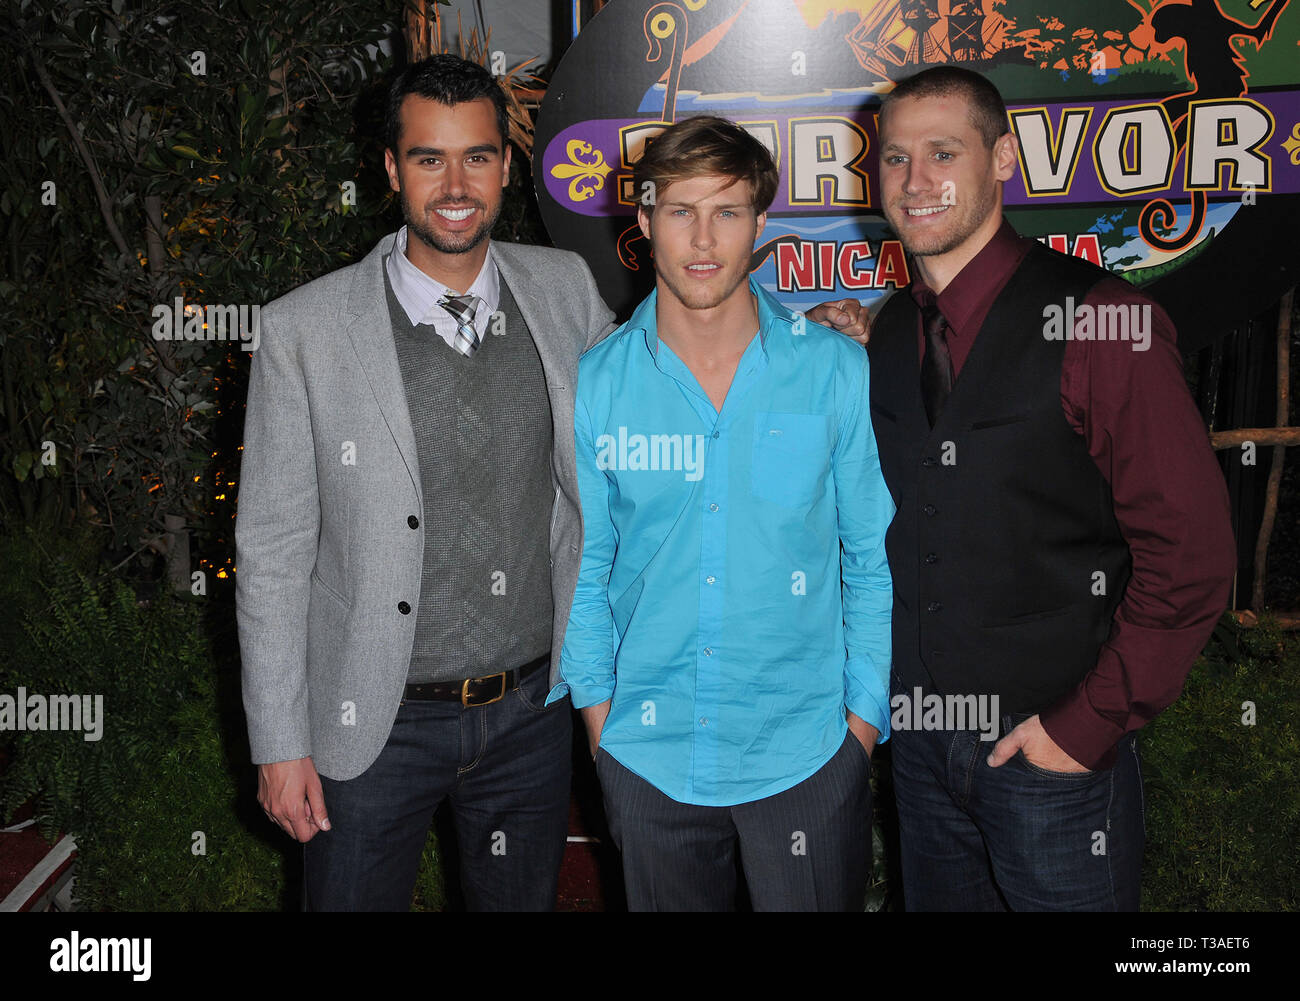 Judson 'fabio' Birza, Chase Rice, Matthew Lenahan  - Survivor- Nicaragua Finale on the CBS lot in Los Angeles.a_Judson 'fabio' Birza, Chase Rice, Matthew Lenahan_02  Event in Hollywood Life - California, Red Carpet Event, USA, Film Industry, Celebrities, Photography, Bestof, Arts Culture and Entertainment, Topix Celebrities fashion, Best of, Hollywood Life, Event in Hollywood Life - California, Red Carpet and backstage, movie celebrities, TV celebrities, Music celebrities, Topix, actors from the same movie, cast and co star together.  inquiry tsuni@Gamma-USA.com, Credit Tsuni / USA, 2010 - Gro Stock Photo